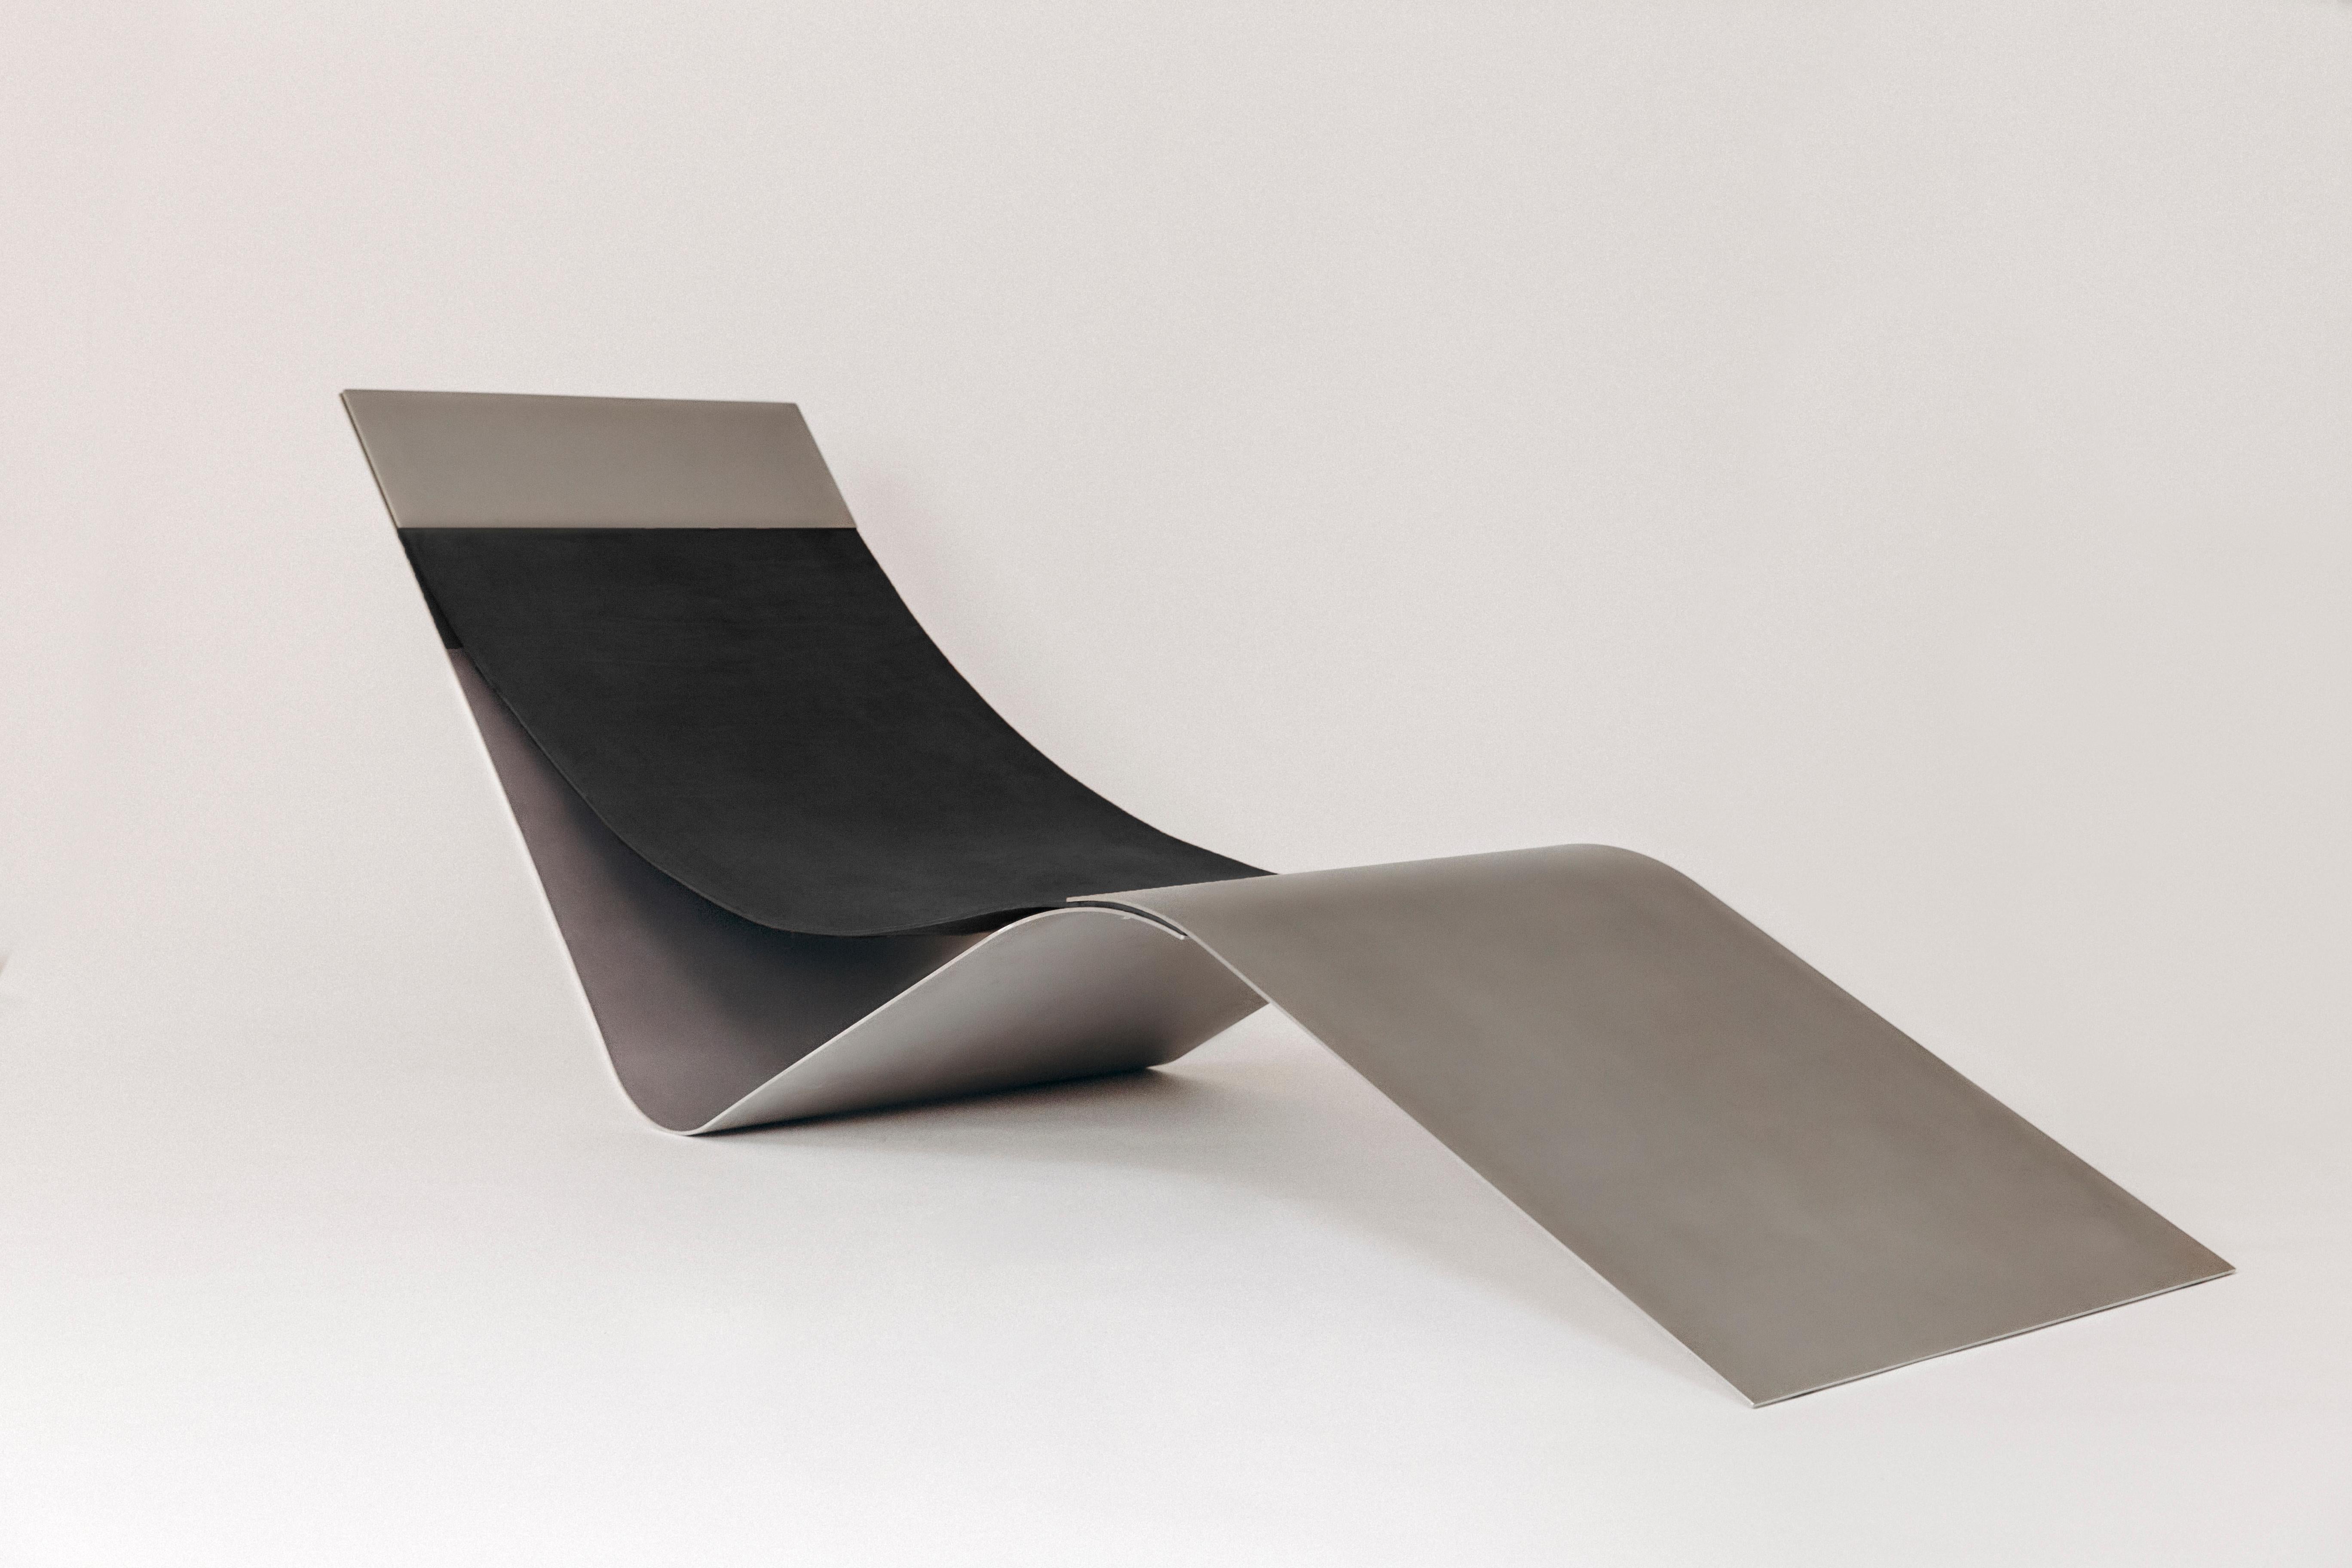 Chaise longue by Linde Hermans
Signed
Dimensions: 62,5 x 180 x 75 cm
Materials: Stainless steel and saddle leather (Both thickness 4 mm)
Different colours of leather possible

